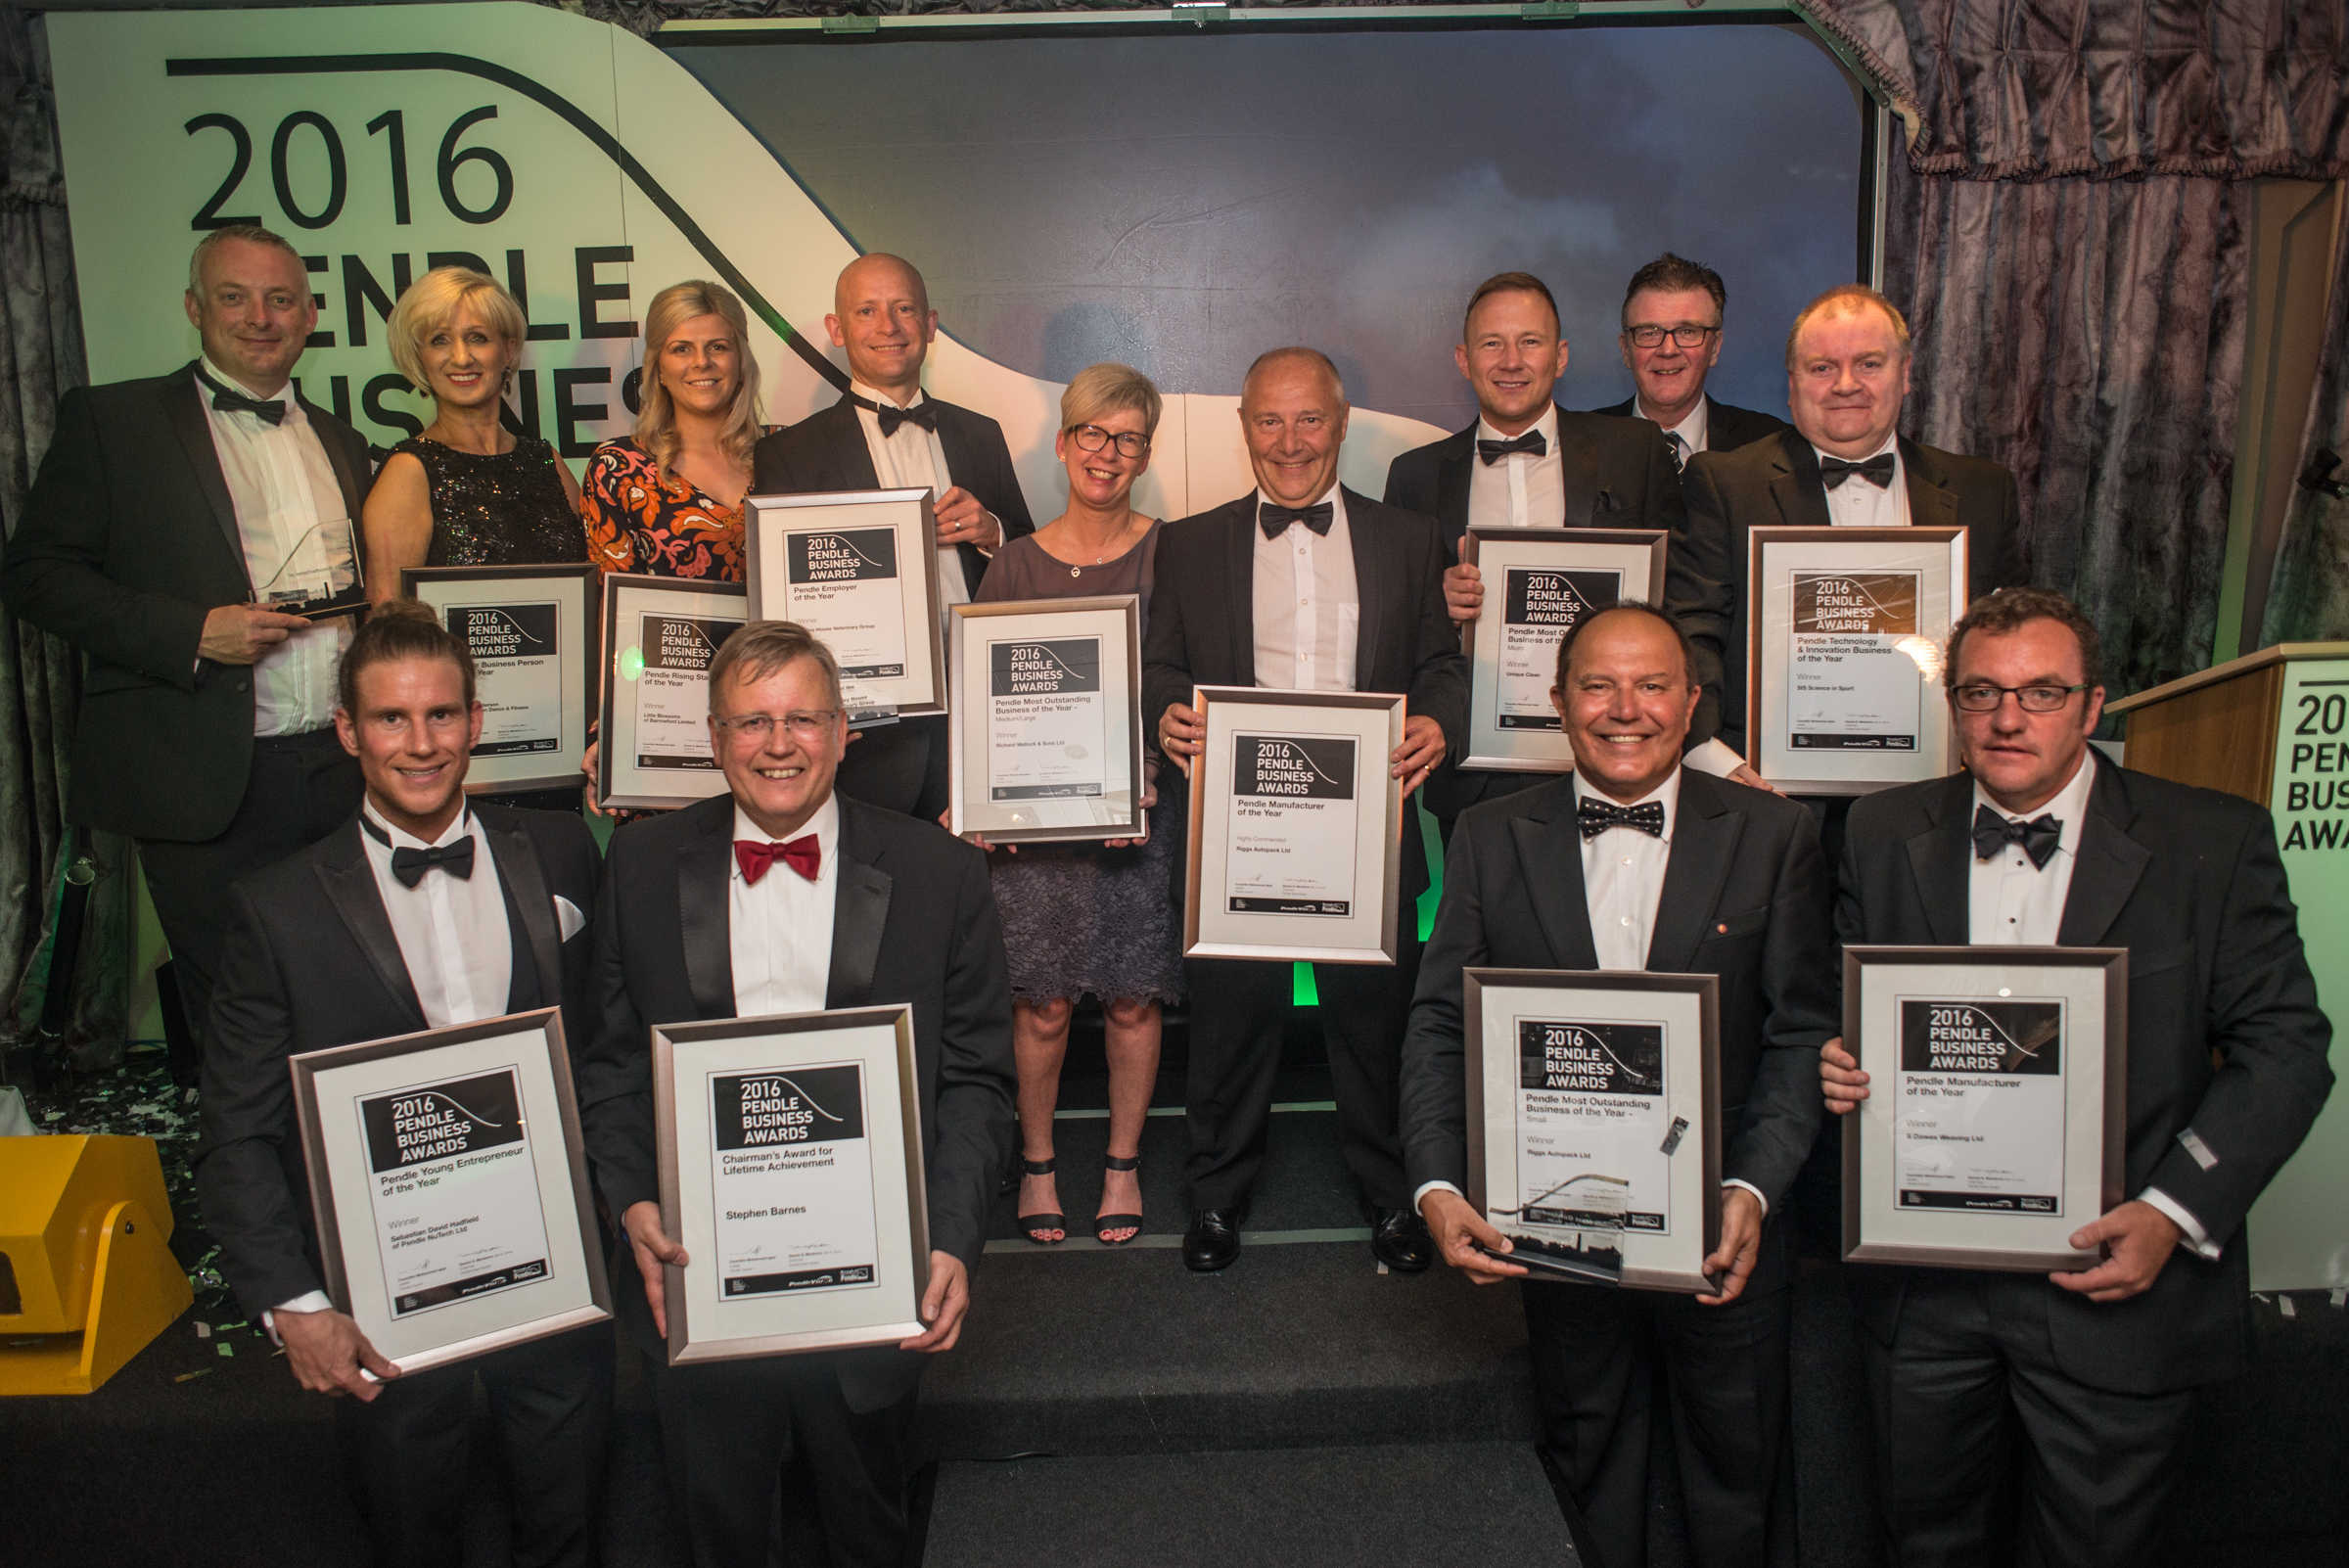 Pendle Business Awards 2016 reveals its winners!